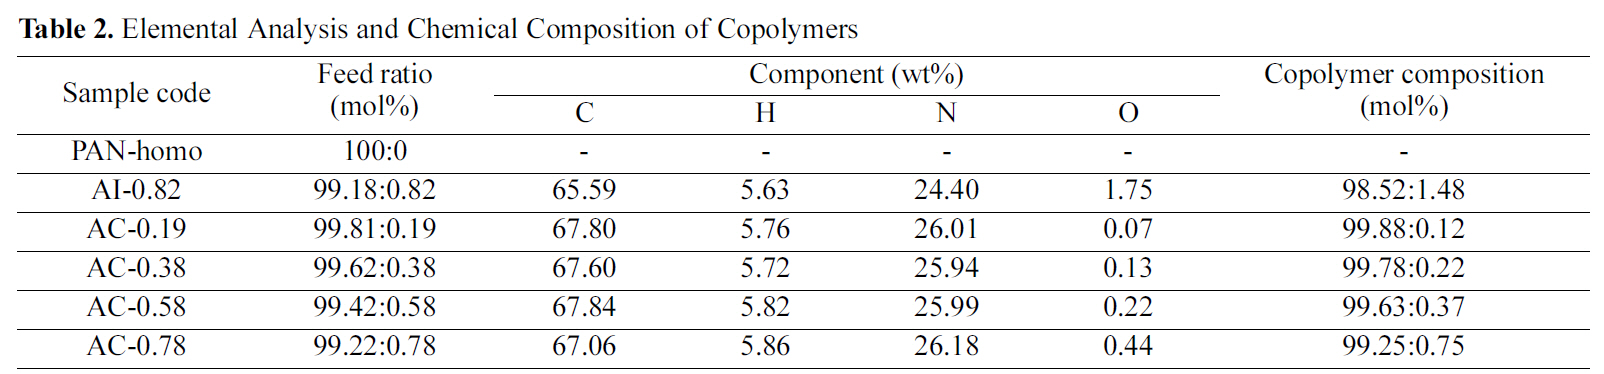 Elemental Analysis and Chemical Composition of Copolymers